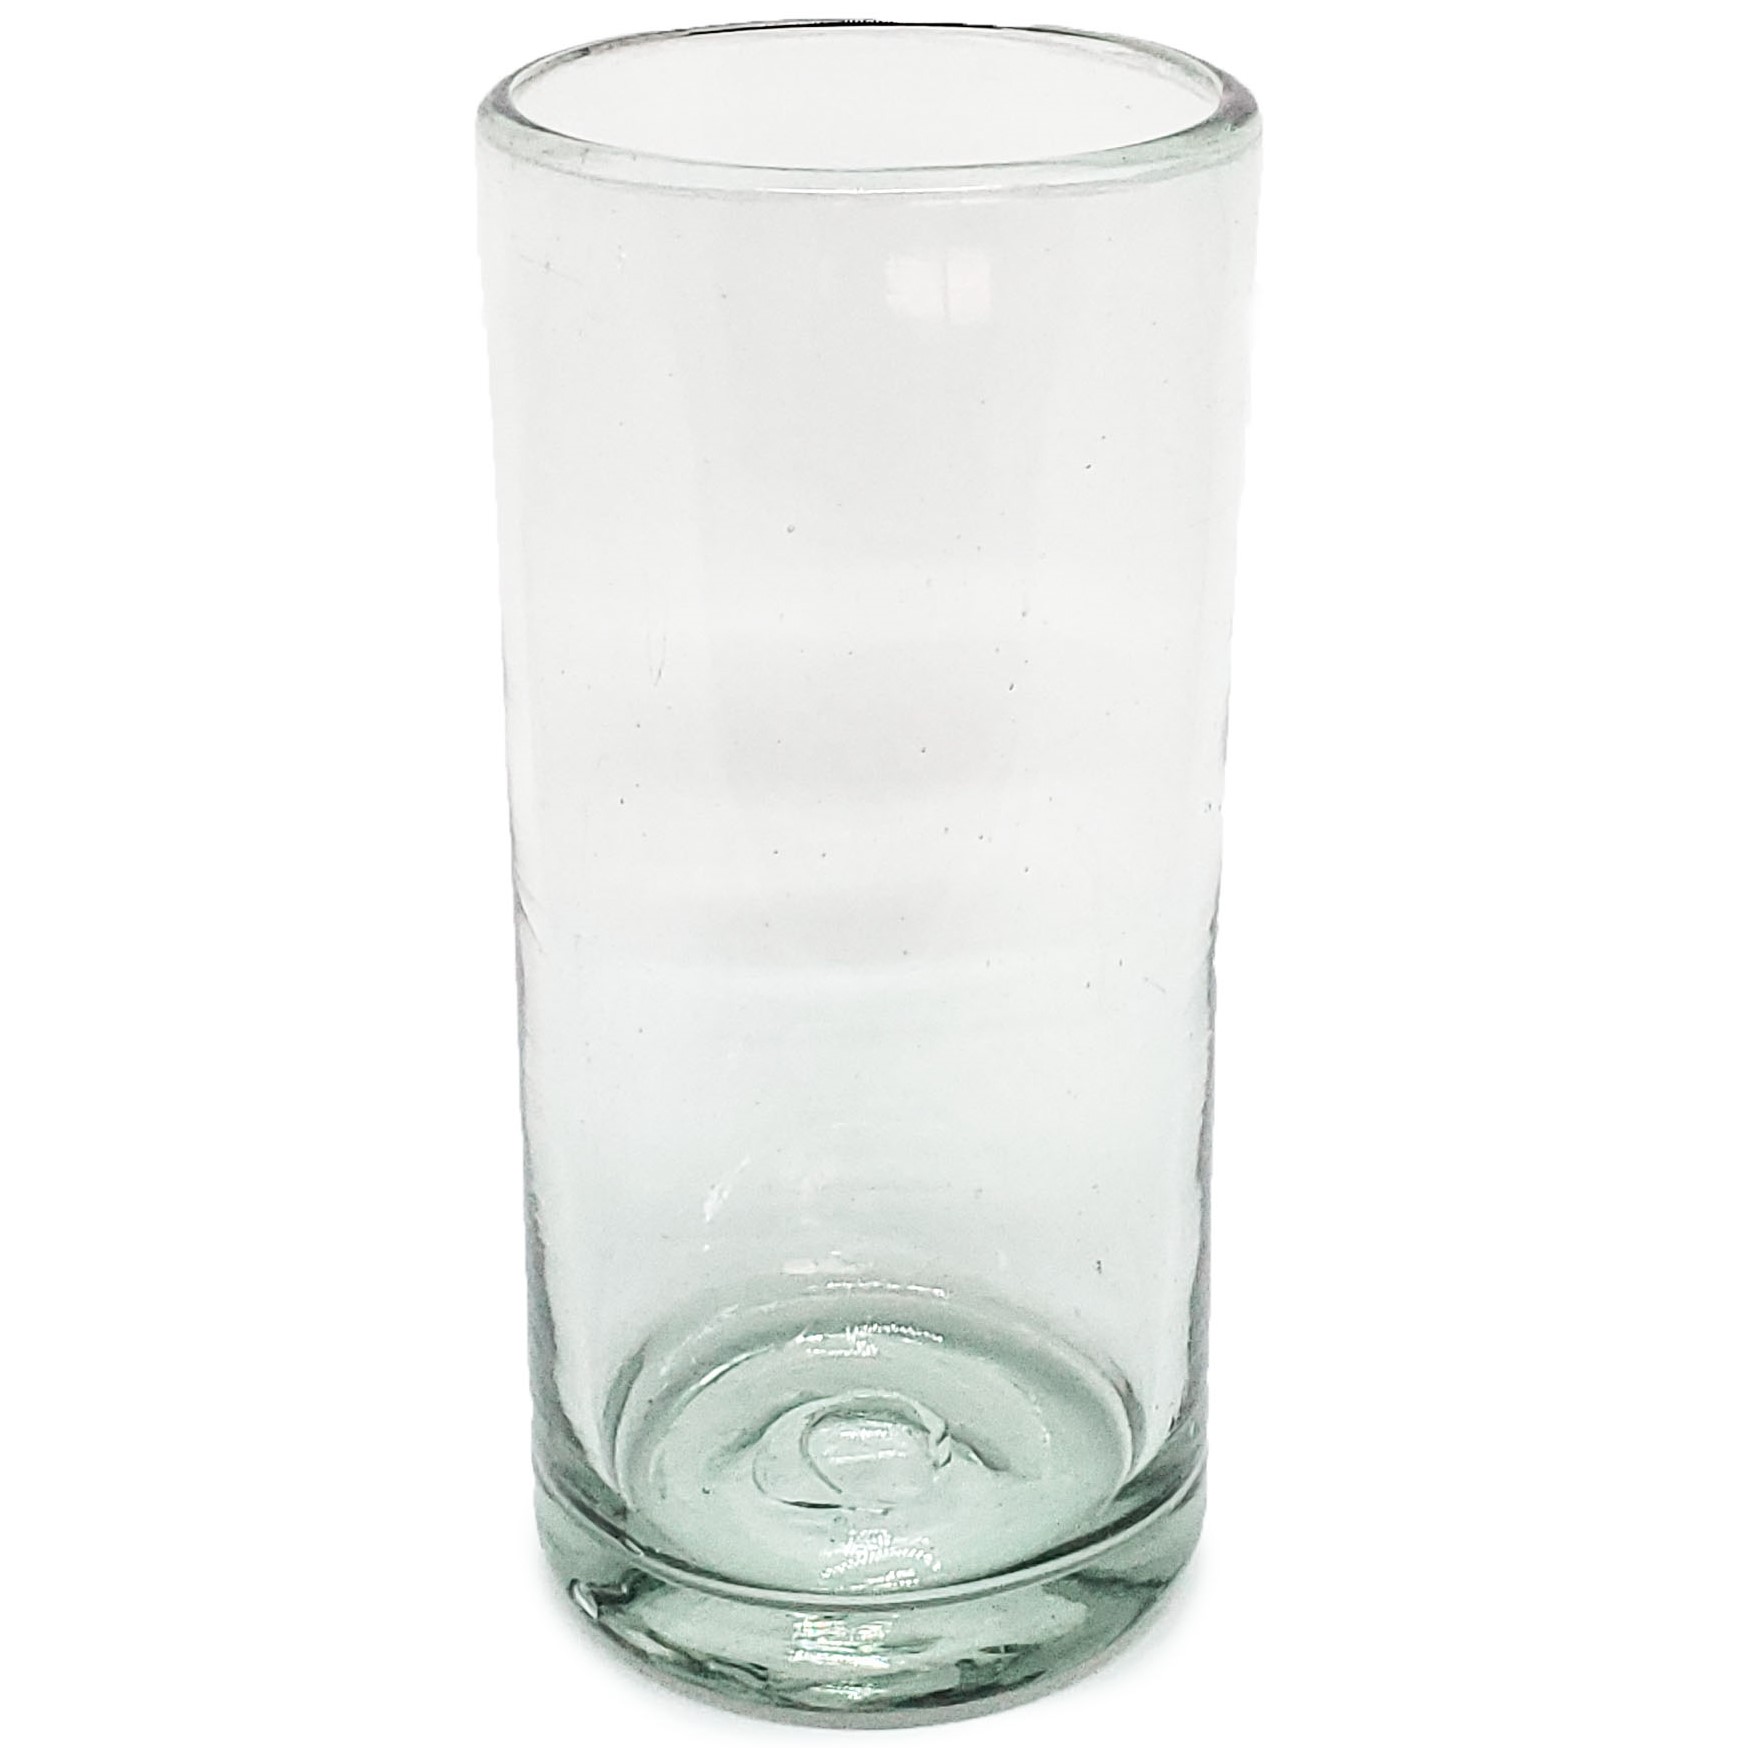 Wholesale MEXICAN GLASSWARE / Clear 20 oz Tall Iced Tea Glasses  / This classic set of iced tea glasses is made of recycled glass. Tiny bubbles are trapped within the glass.